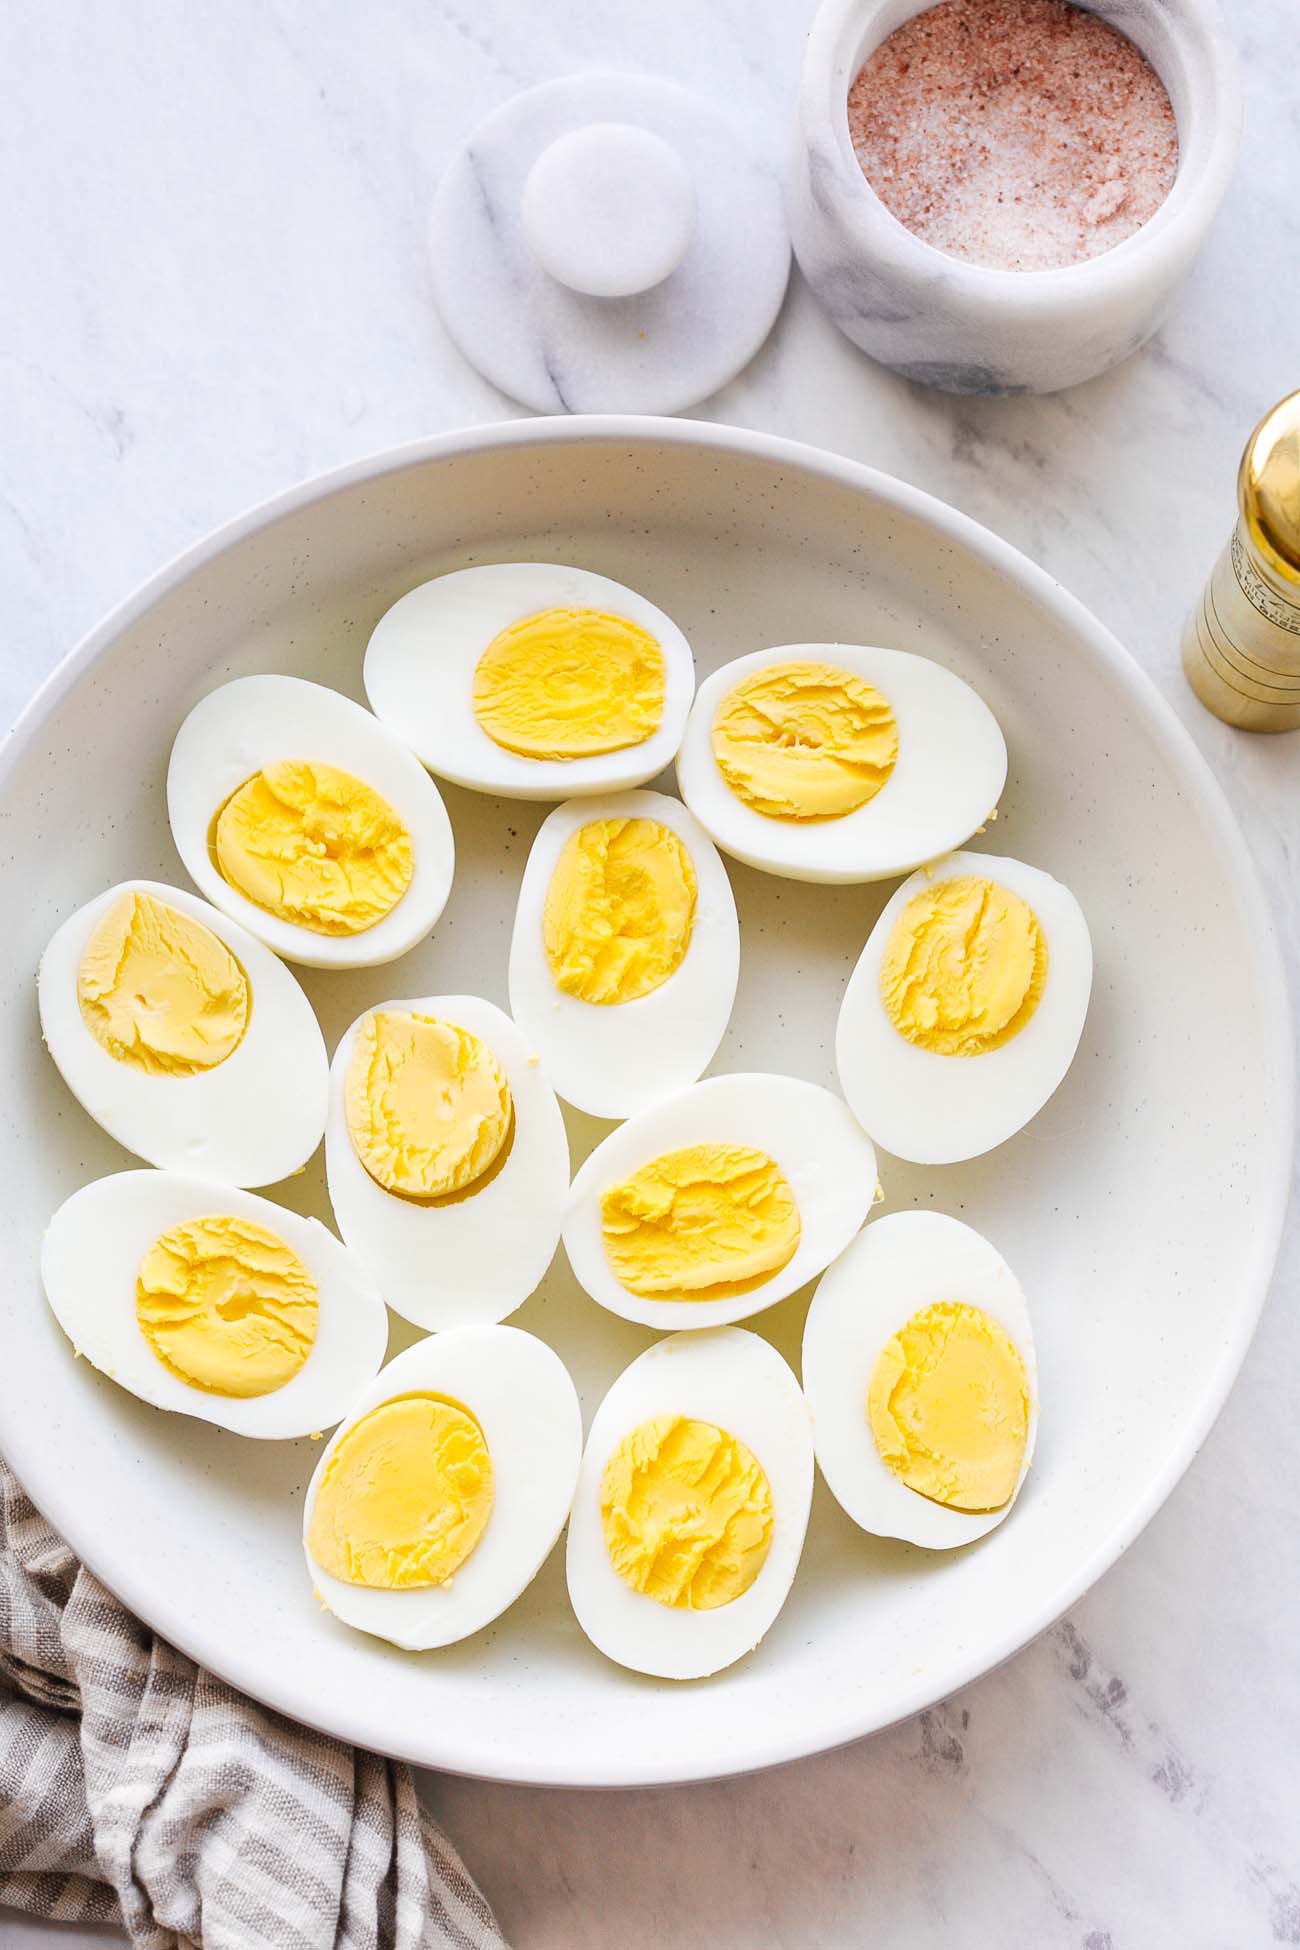 100 Ways to Cook an Egg